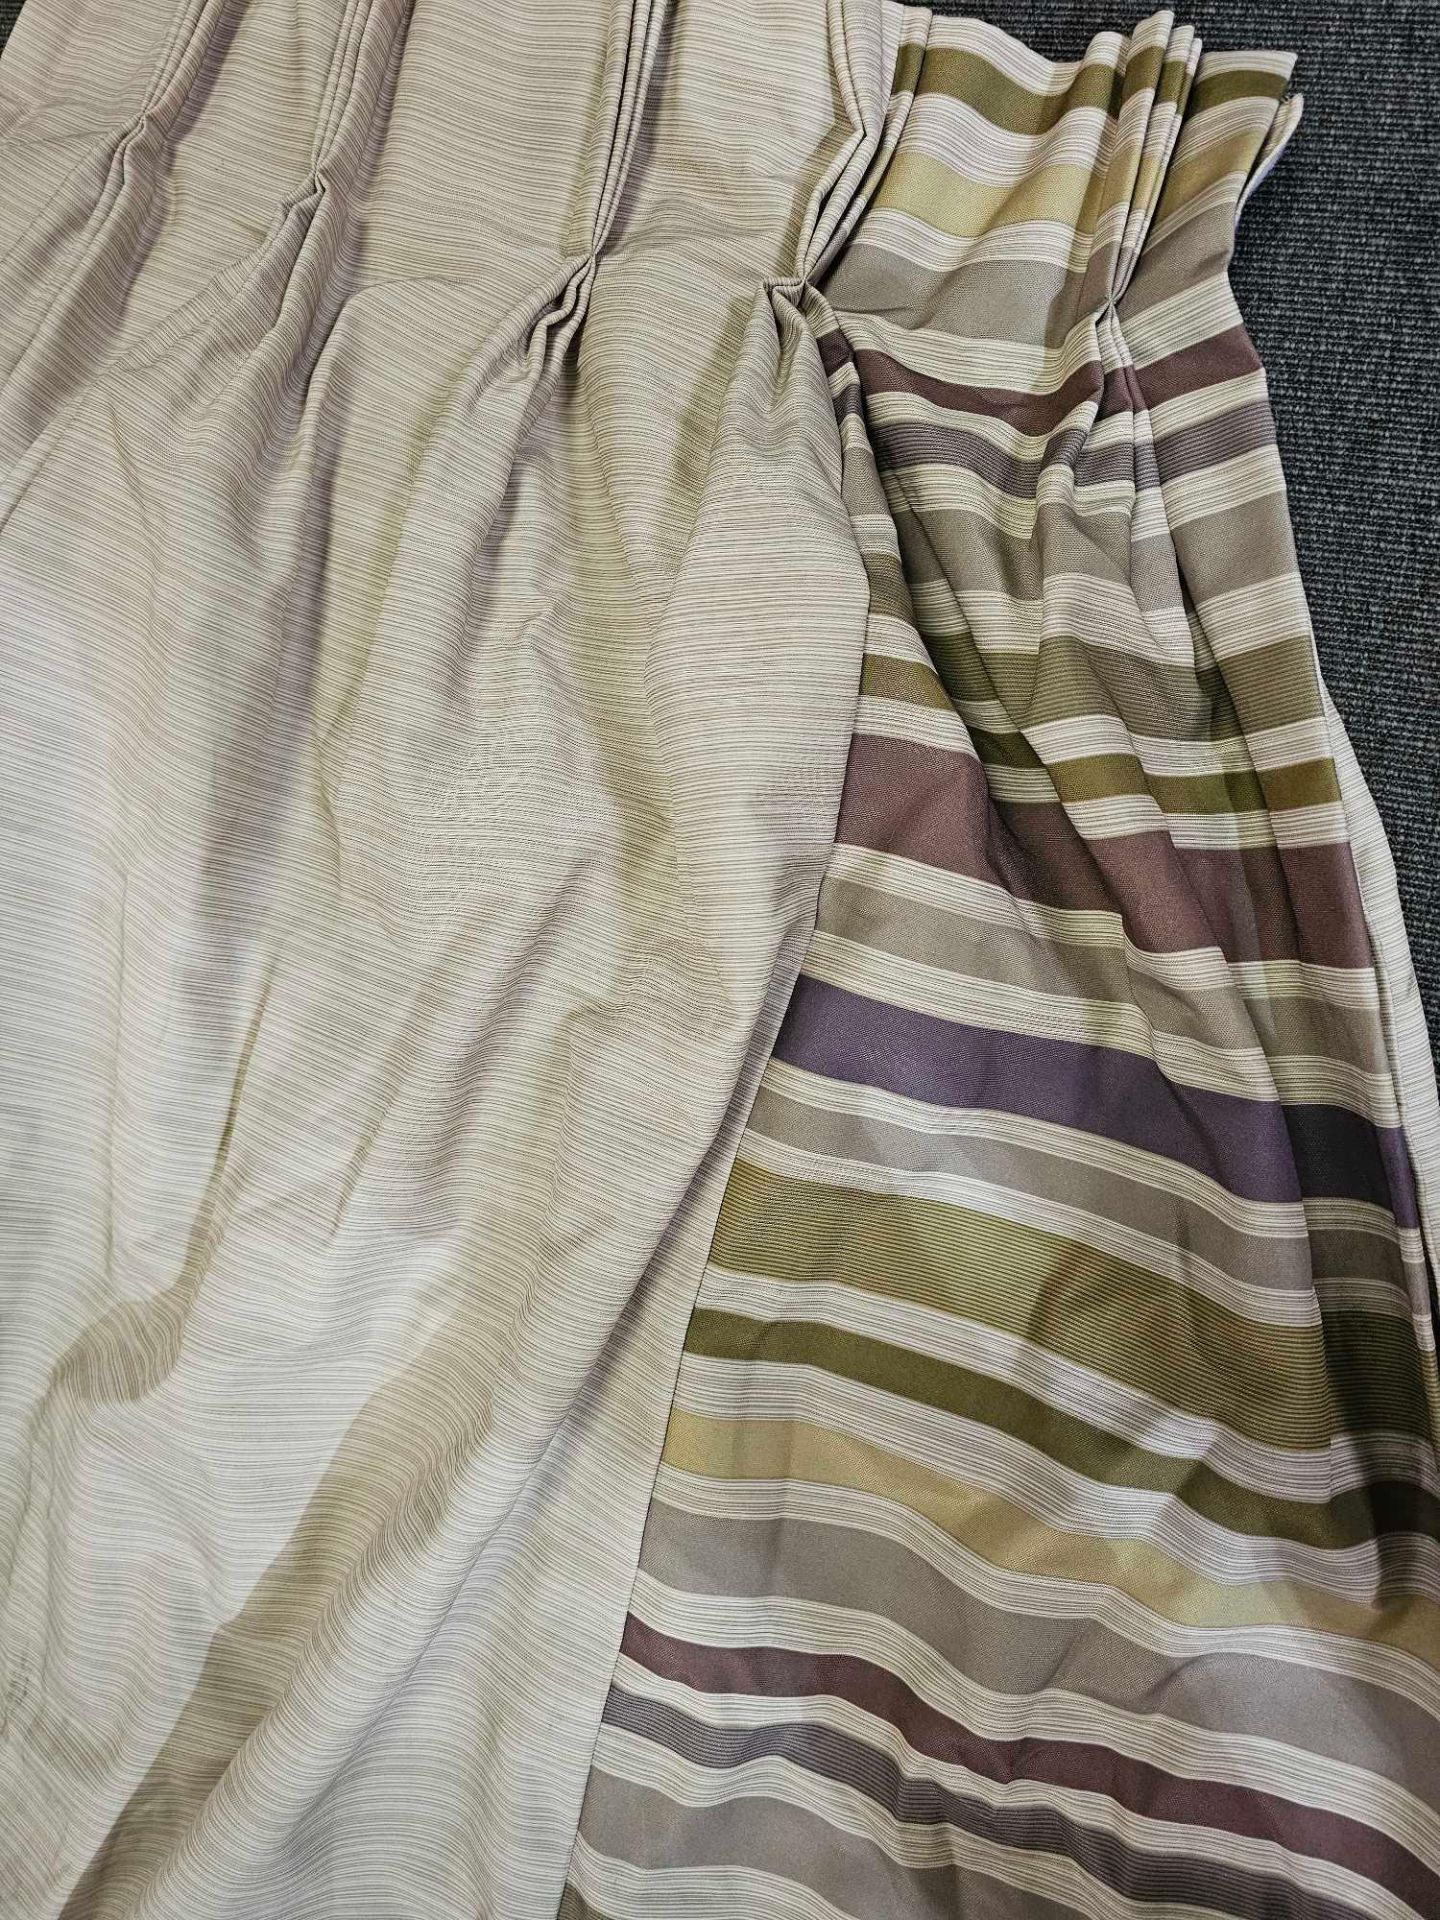 A Pair Of Curtains Striped Edge Purple/Green/Beige/Lime/Brown Size 284 x 250cm ( Ref Red 155) - Image 2 of 2